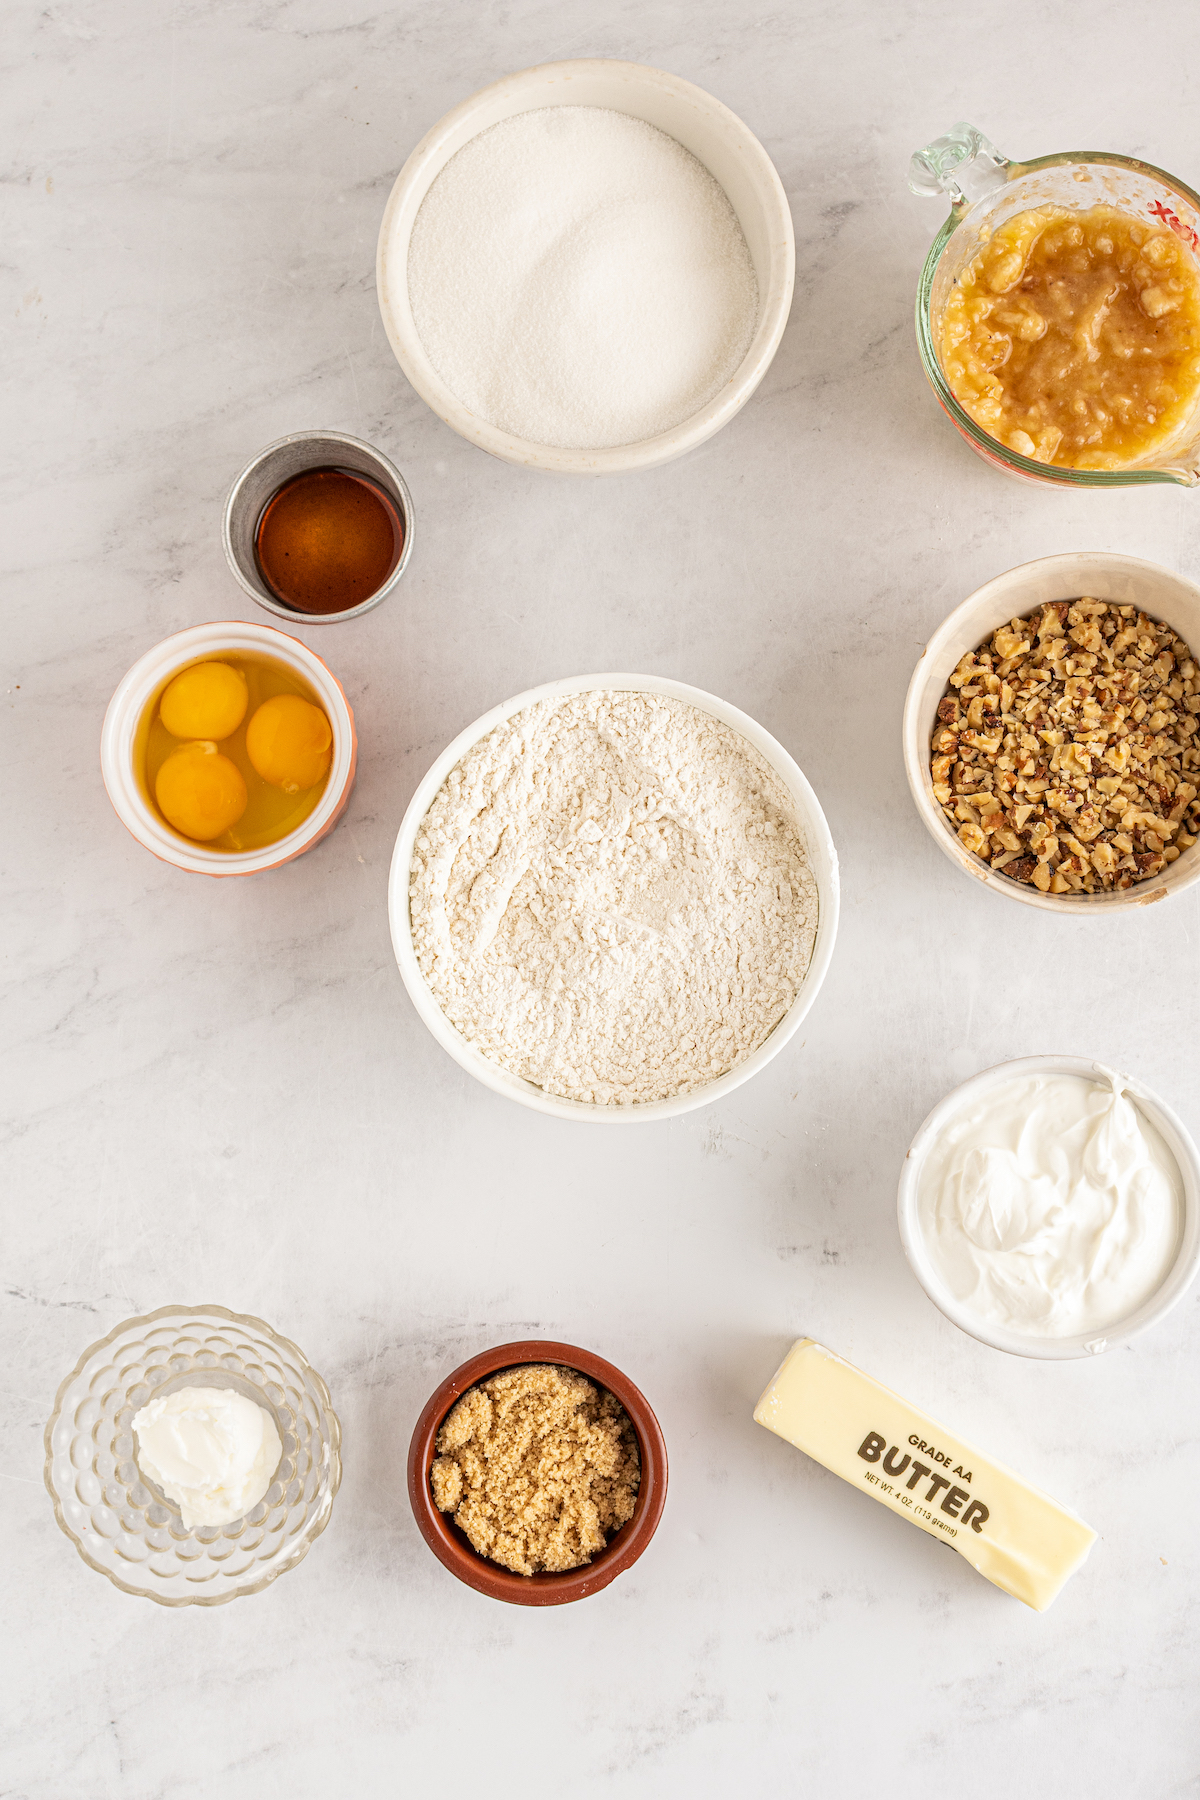 Dry baking ingredients mixed together in a bowl. Wet ingredients are arranged around the mixing bowl.